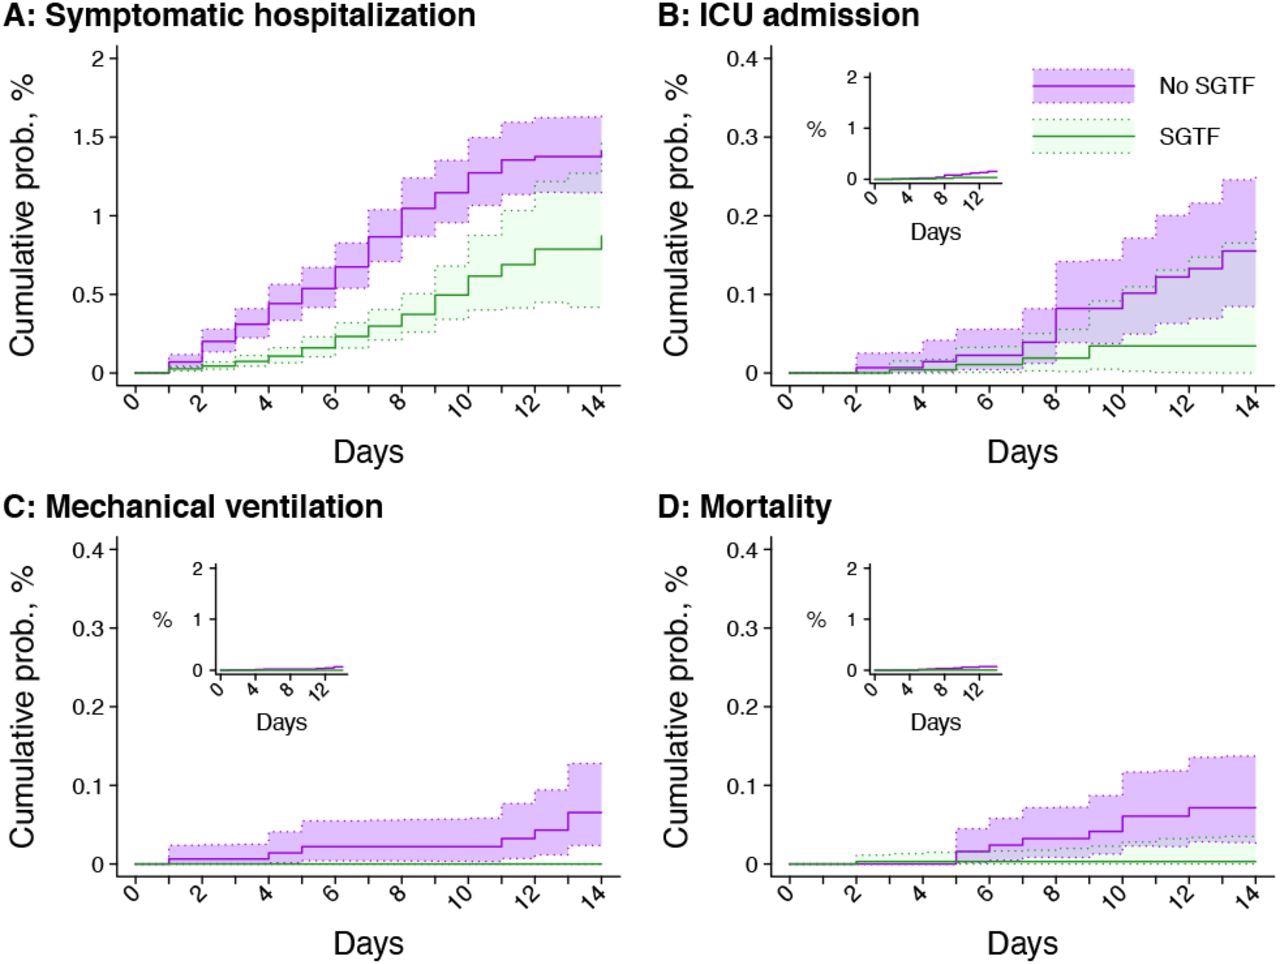 Times to severe outcomes among cases with SGTF and non-SGTF infections first detected in outpatient settings. Panels include (A) symptomatic hospital admissions; (B) ICU admissions; (C) initiations of mechanical ventilation; and (D) mortality. Inset plots within each panel illustrate cumulative probabilities on the same y-axis scale as panel A. Shaded regions denote 95% confidence intervals. Green and violet correspond to detections with and without SGTF (interpreted as a proxy for SARS-CoV-2 Omicron variant infection), respectively.